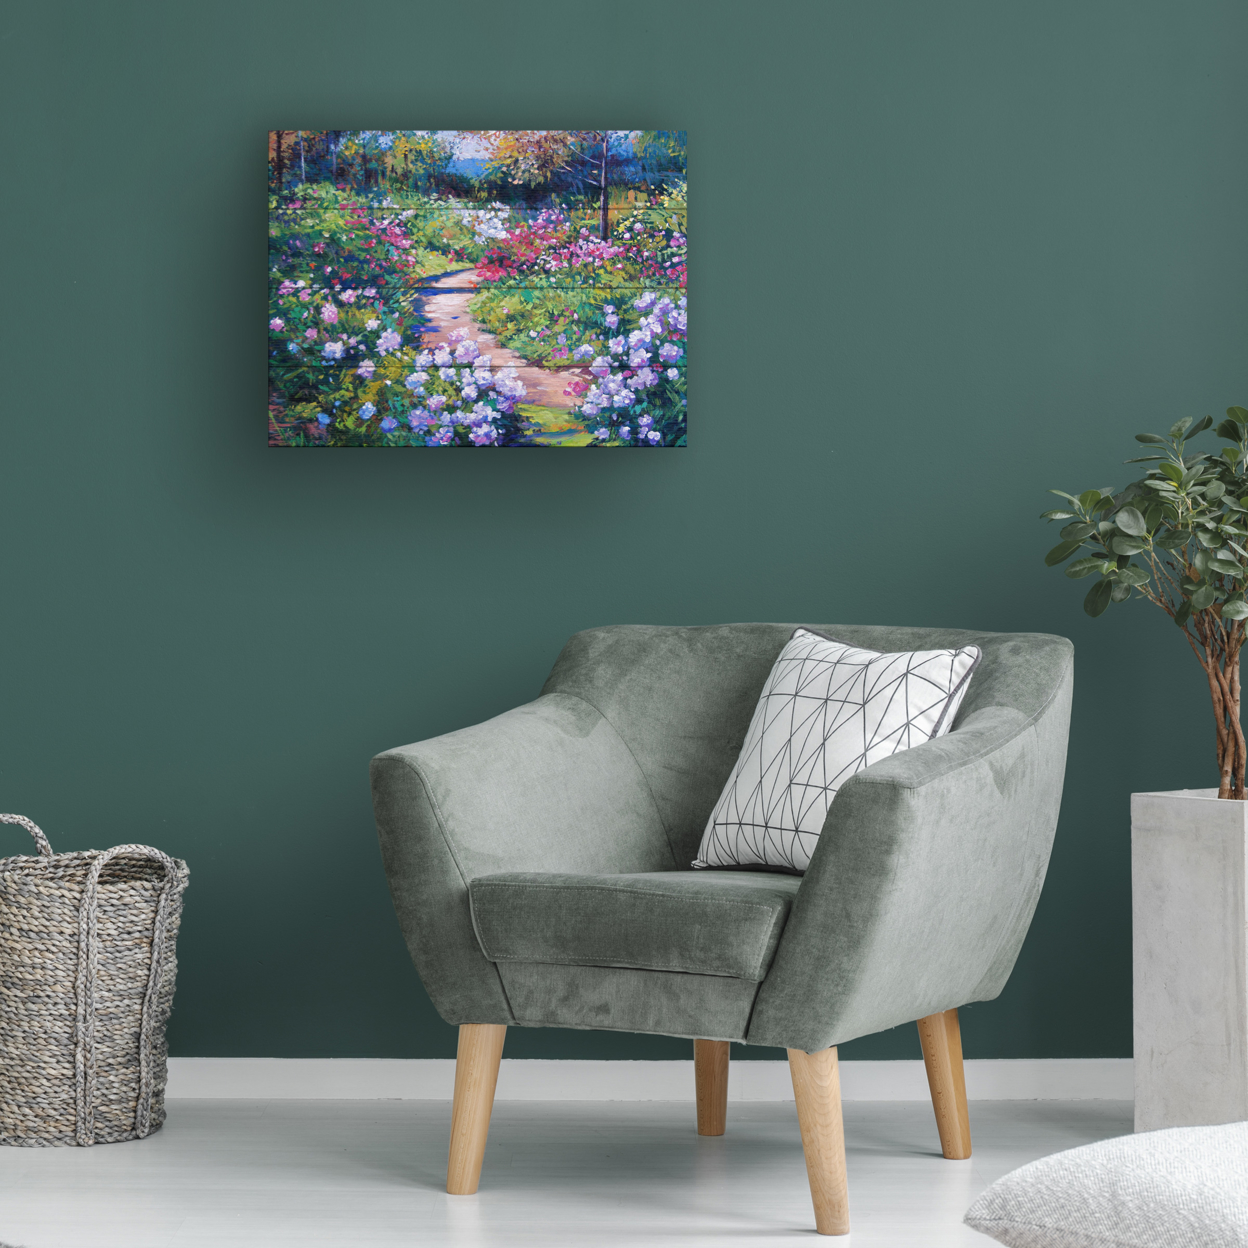 Wall Art 12 X 16 Inches Titled Natures Garden Ready To Hang Printed On Wooden Planks